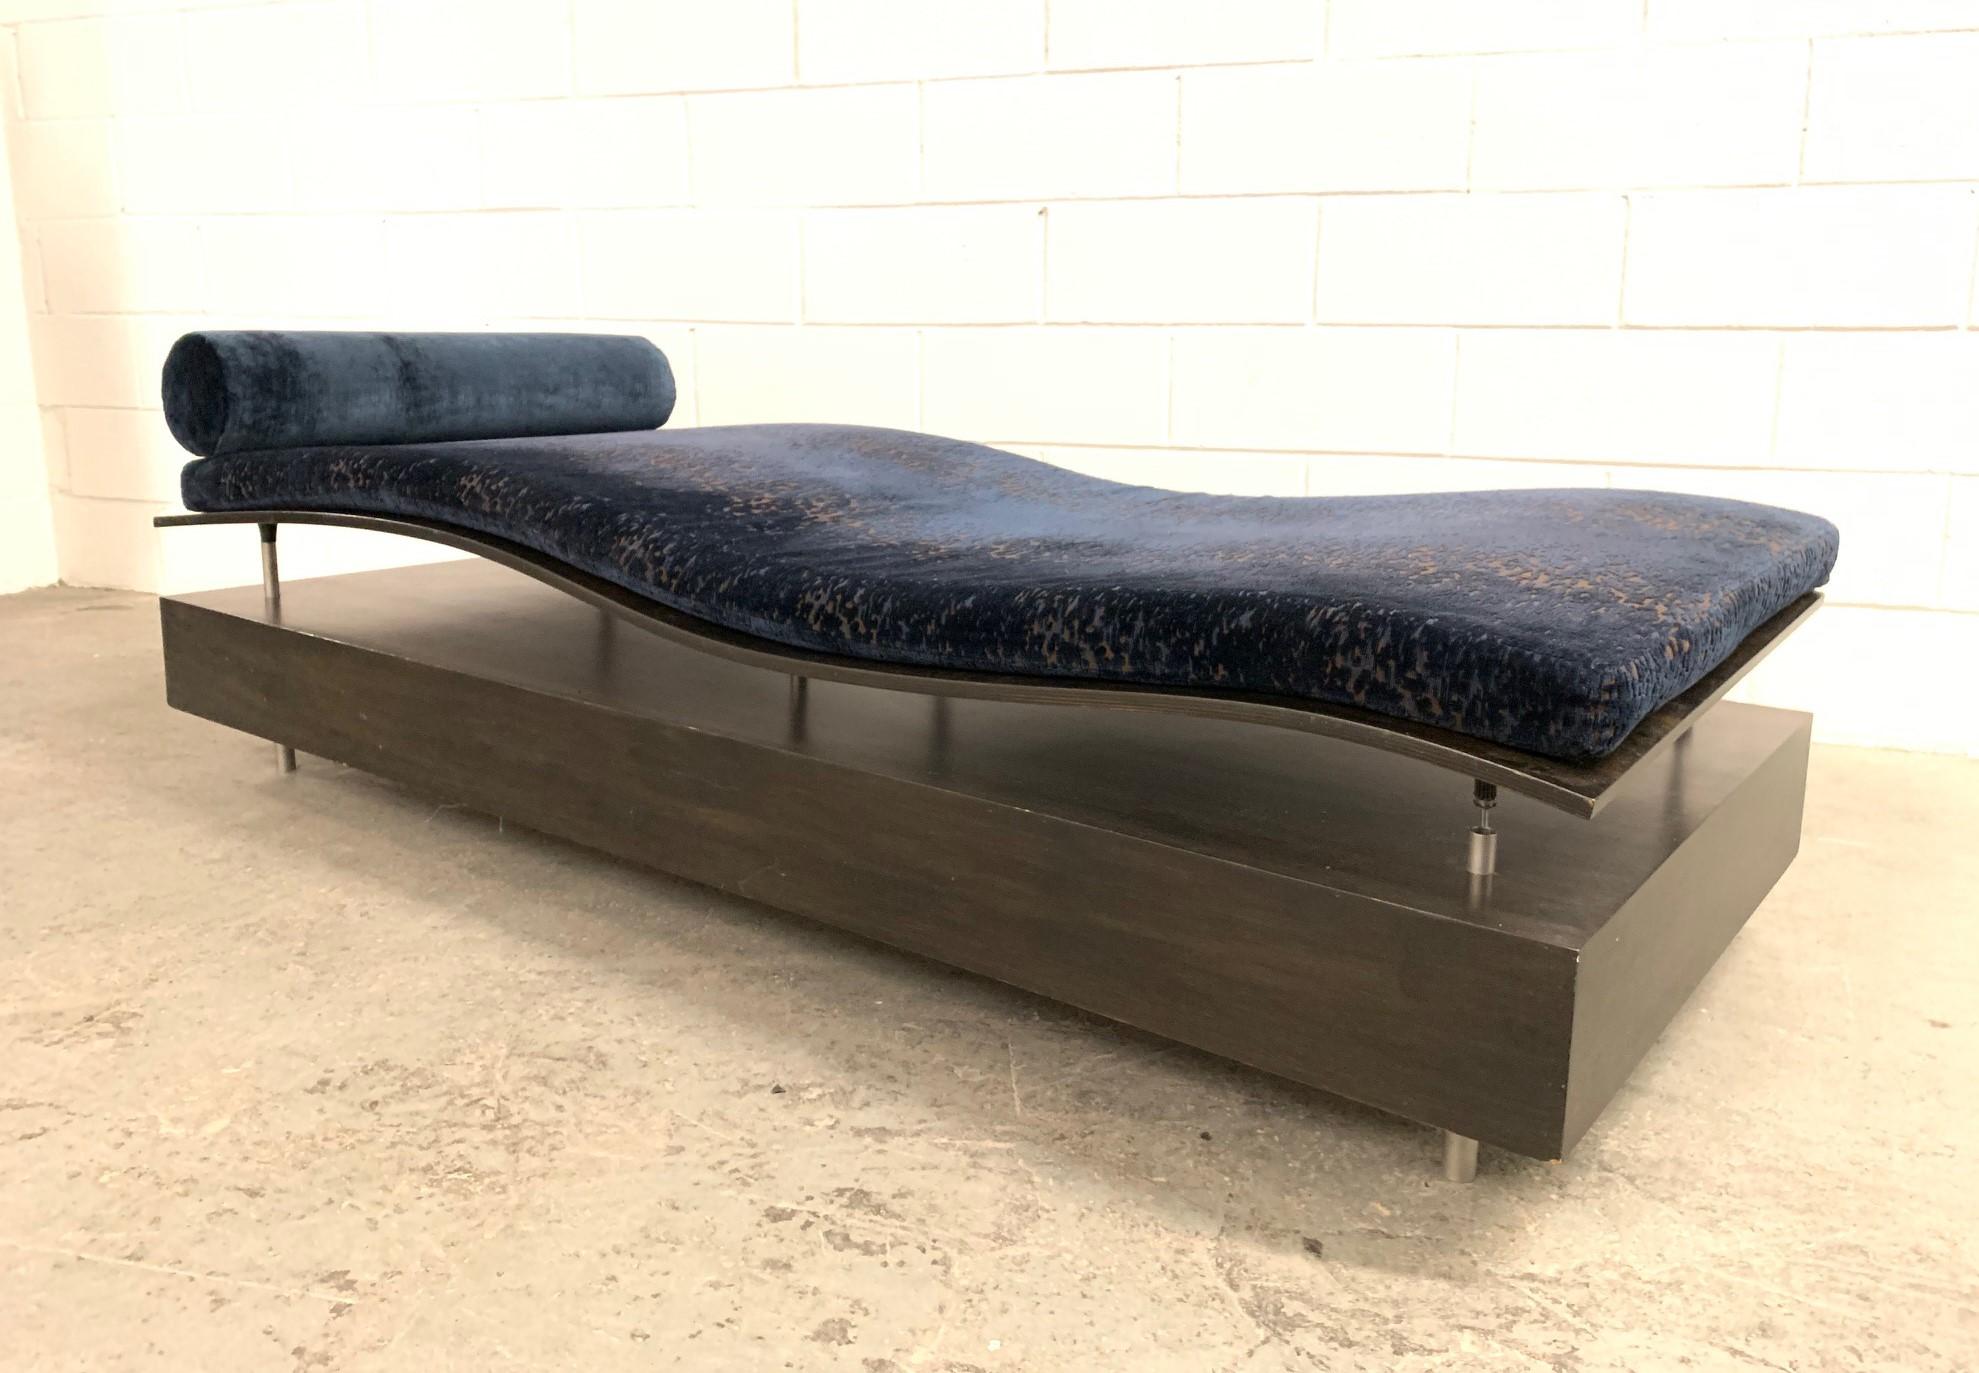 Longitude chaise lounge designed by Maya Lin for Knoll. This chaise is the from the Earth is (not) flat series for Knoll International, 1998. Original upholstery fabric with an attached headrest. It has a wood and metal frame and a contoured